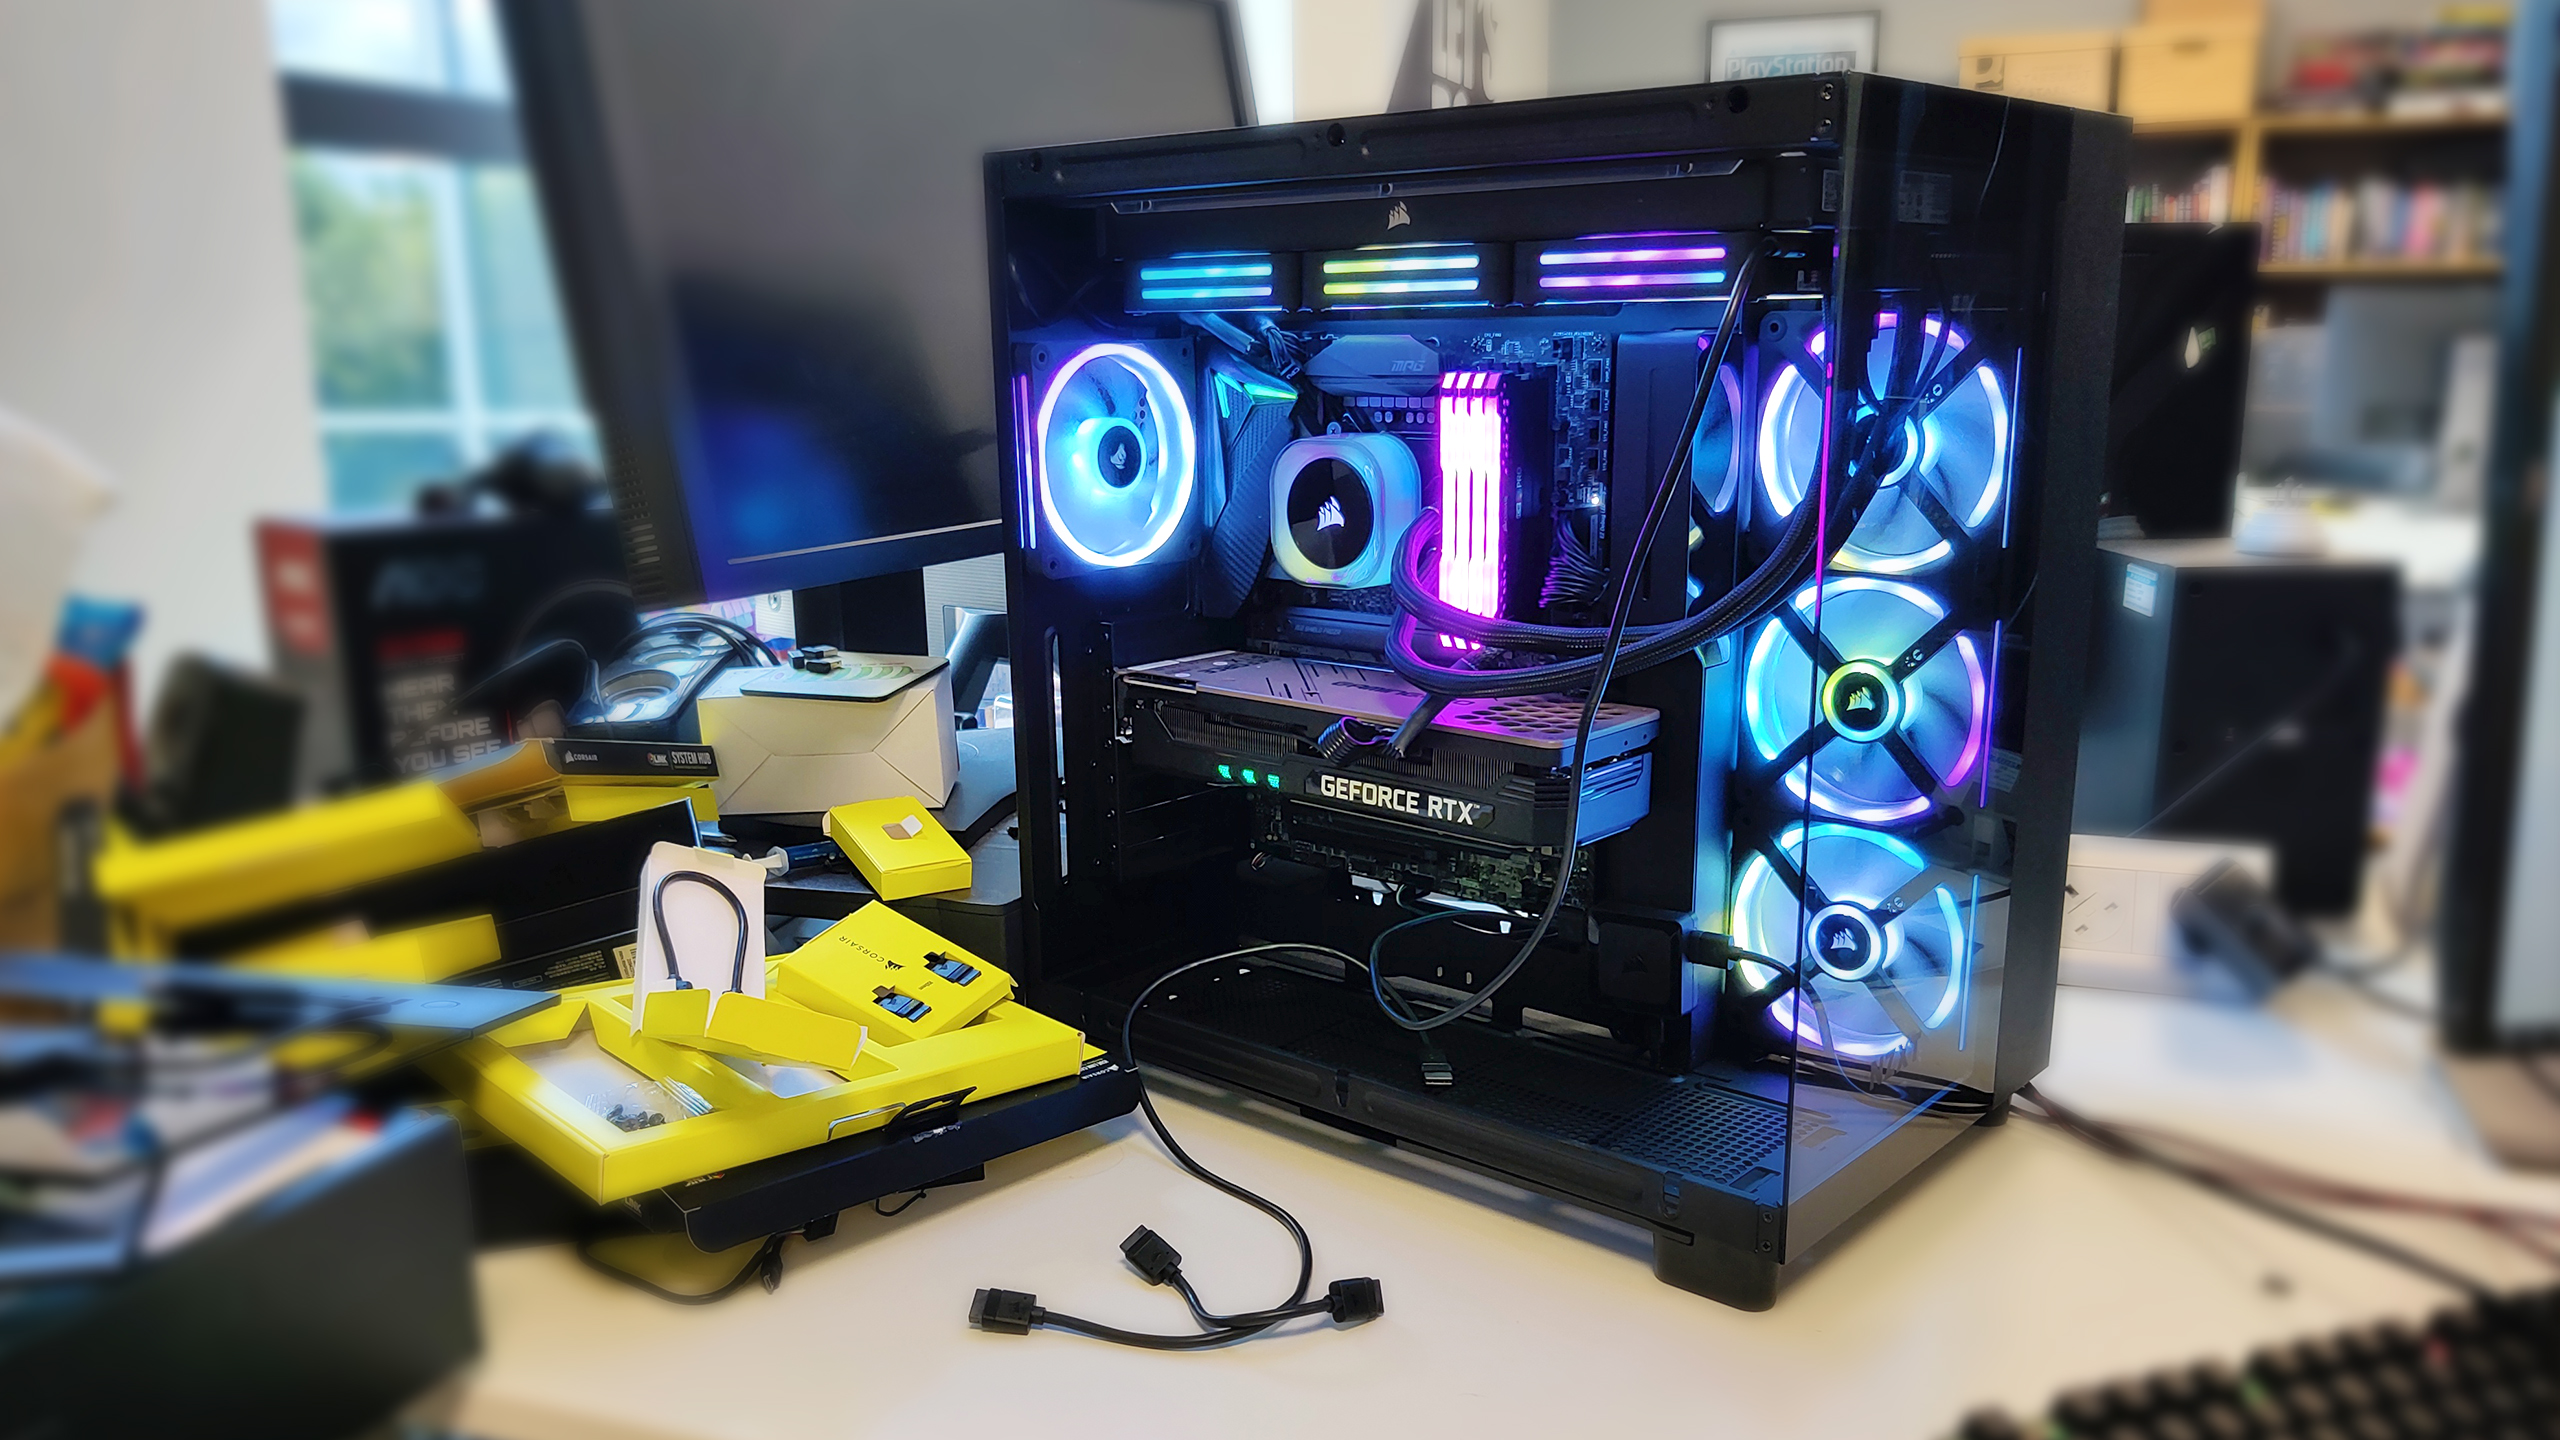 An RGB lit PC case courtesy of Corair's iCue Link cooling system starter kit.